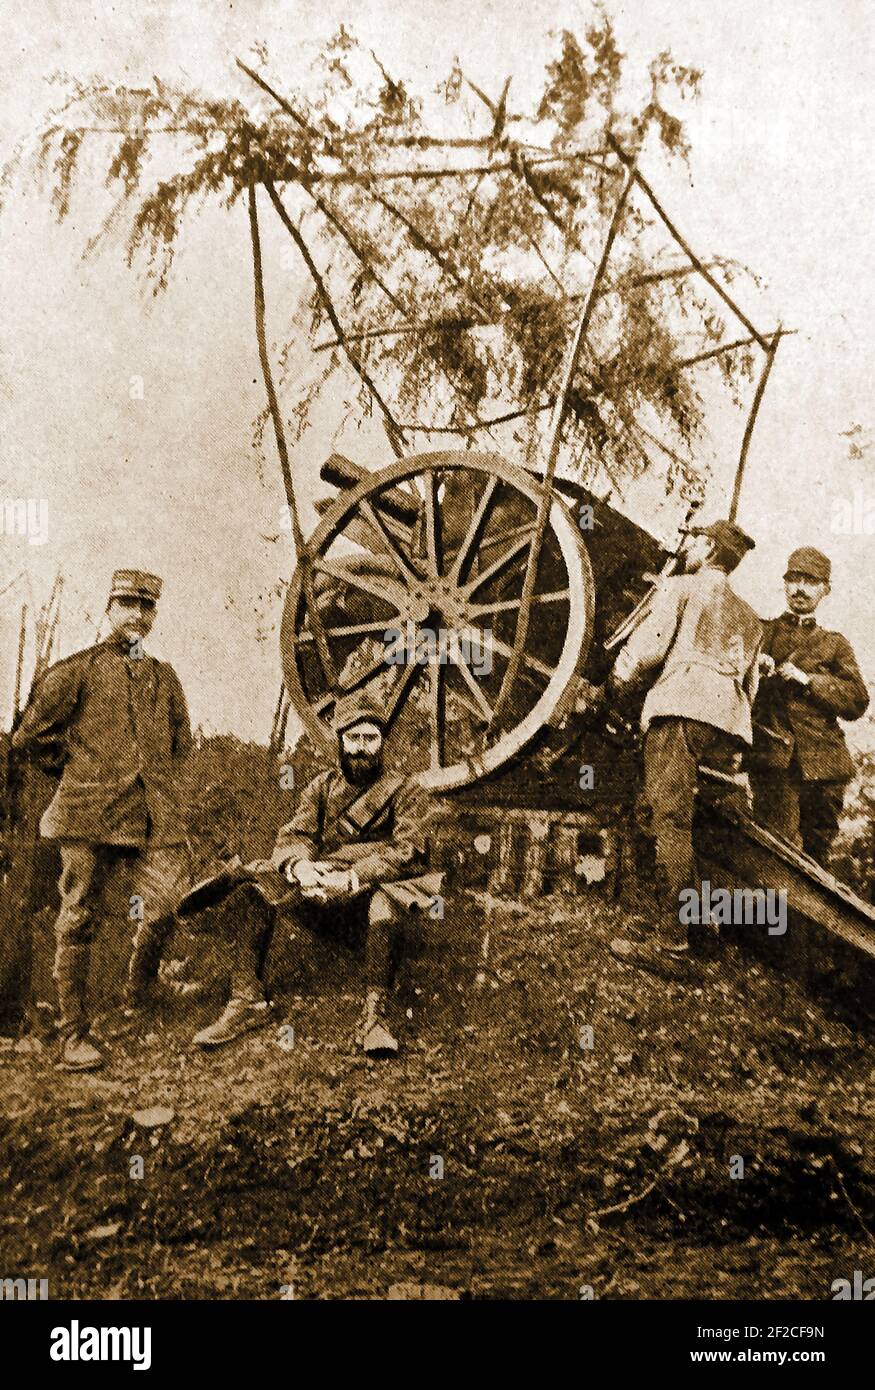 WWI Italian soldiers manning a barely camouflaged anti-aircraft gun.   ====  When World War One began in 1914,   Italy was a partner in the Triple Alliance with Germany and Austria-Hungary, however it   decided to remain neutral and later  resigned from the Triple Alliance on On April 26, 1915, under a  Secret Pact with Britain. Stock Photo